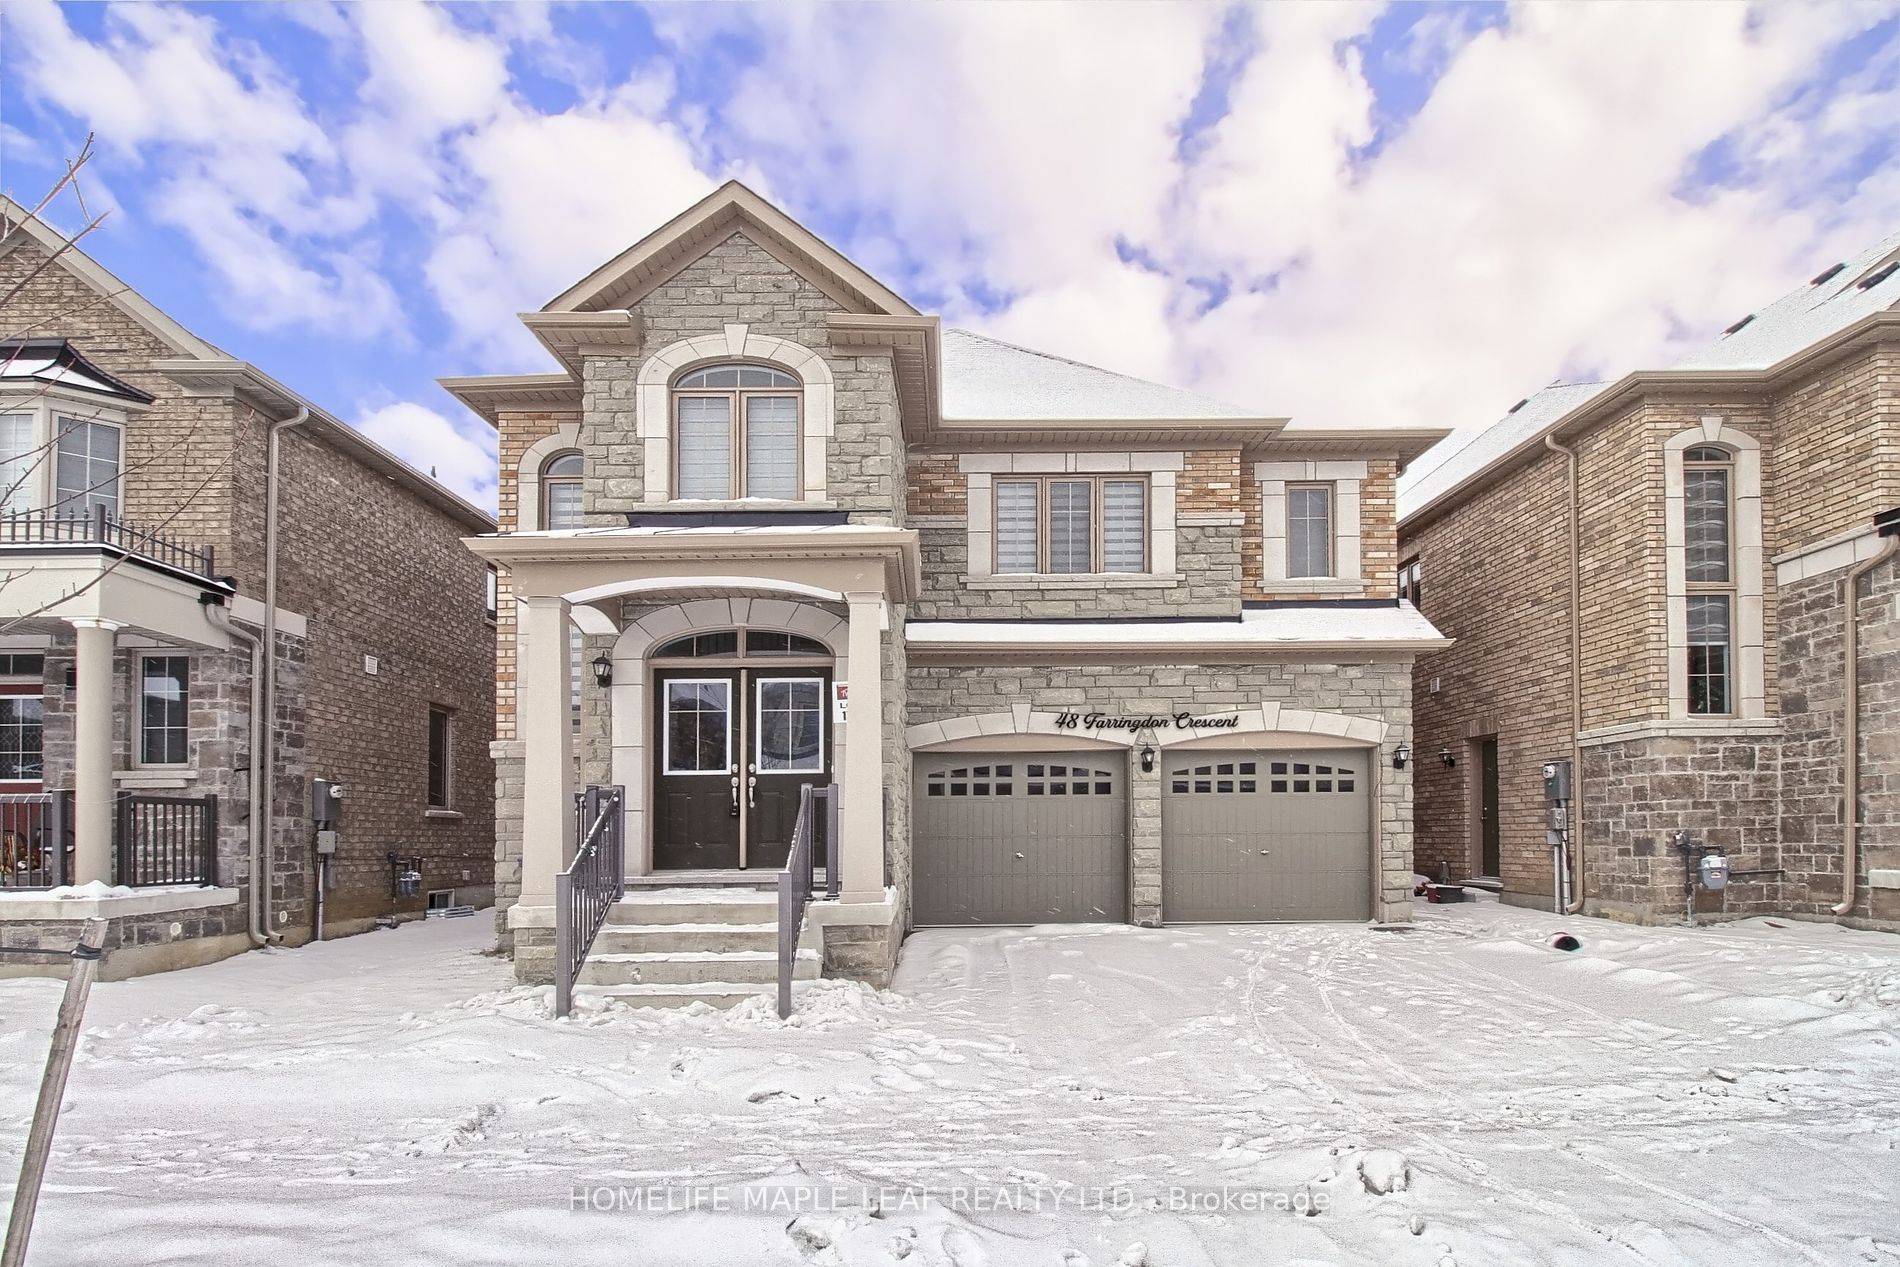 Experience Luxury living in this 4 bed, 4 bath detached home for rent, spanning over 3000 sqft.